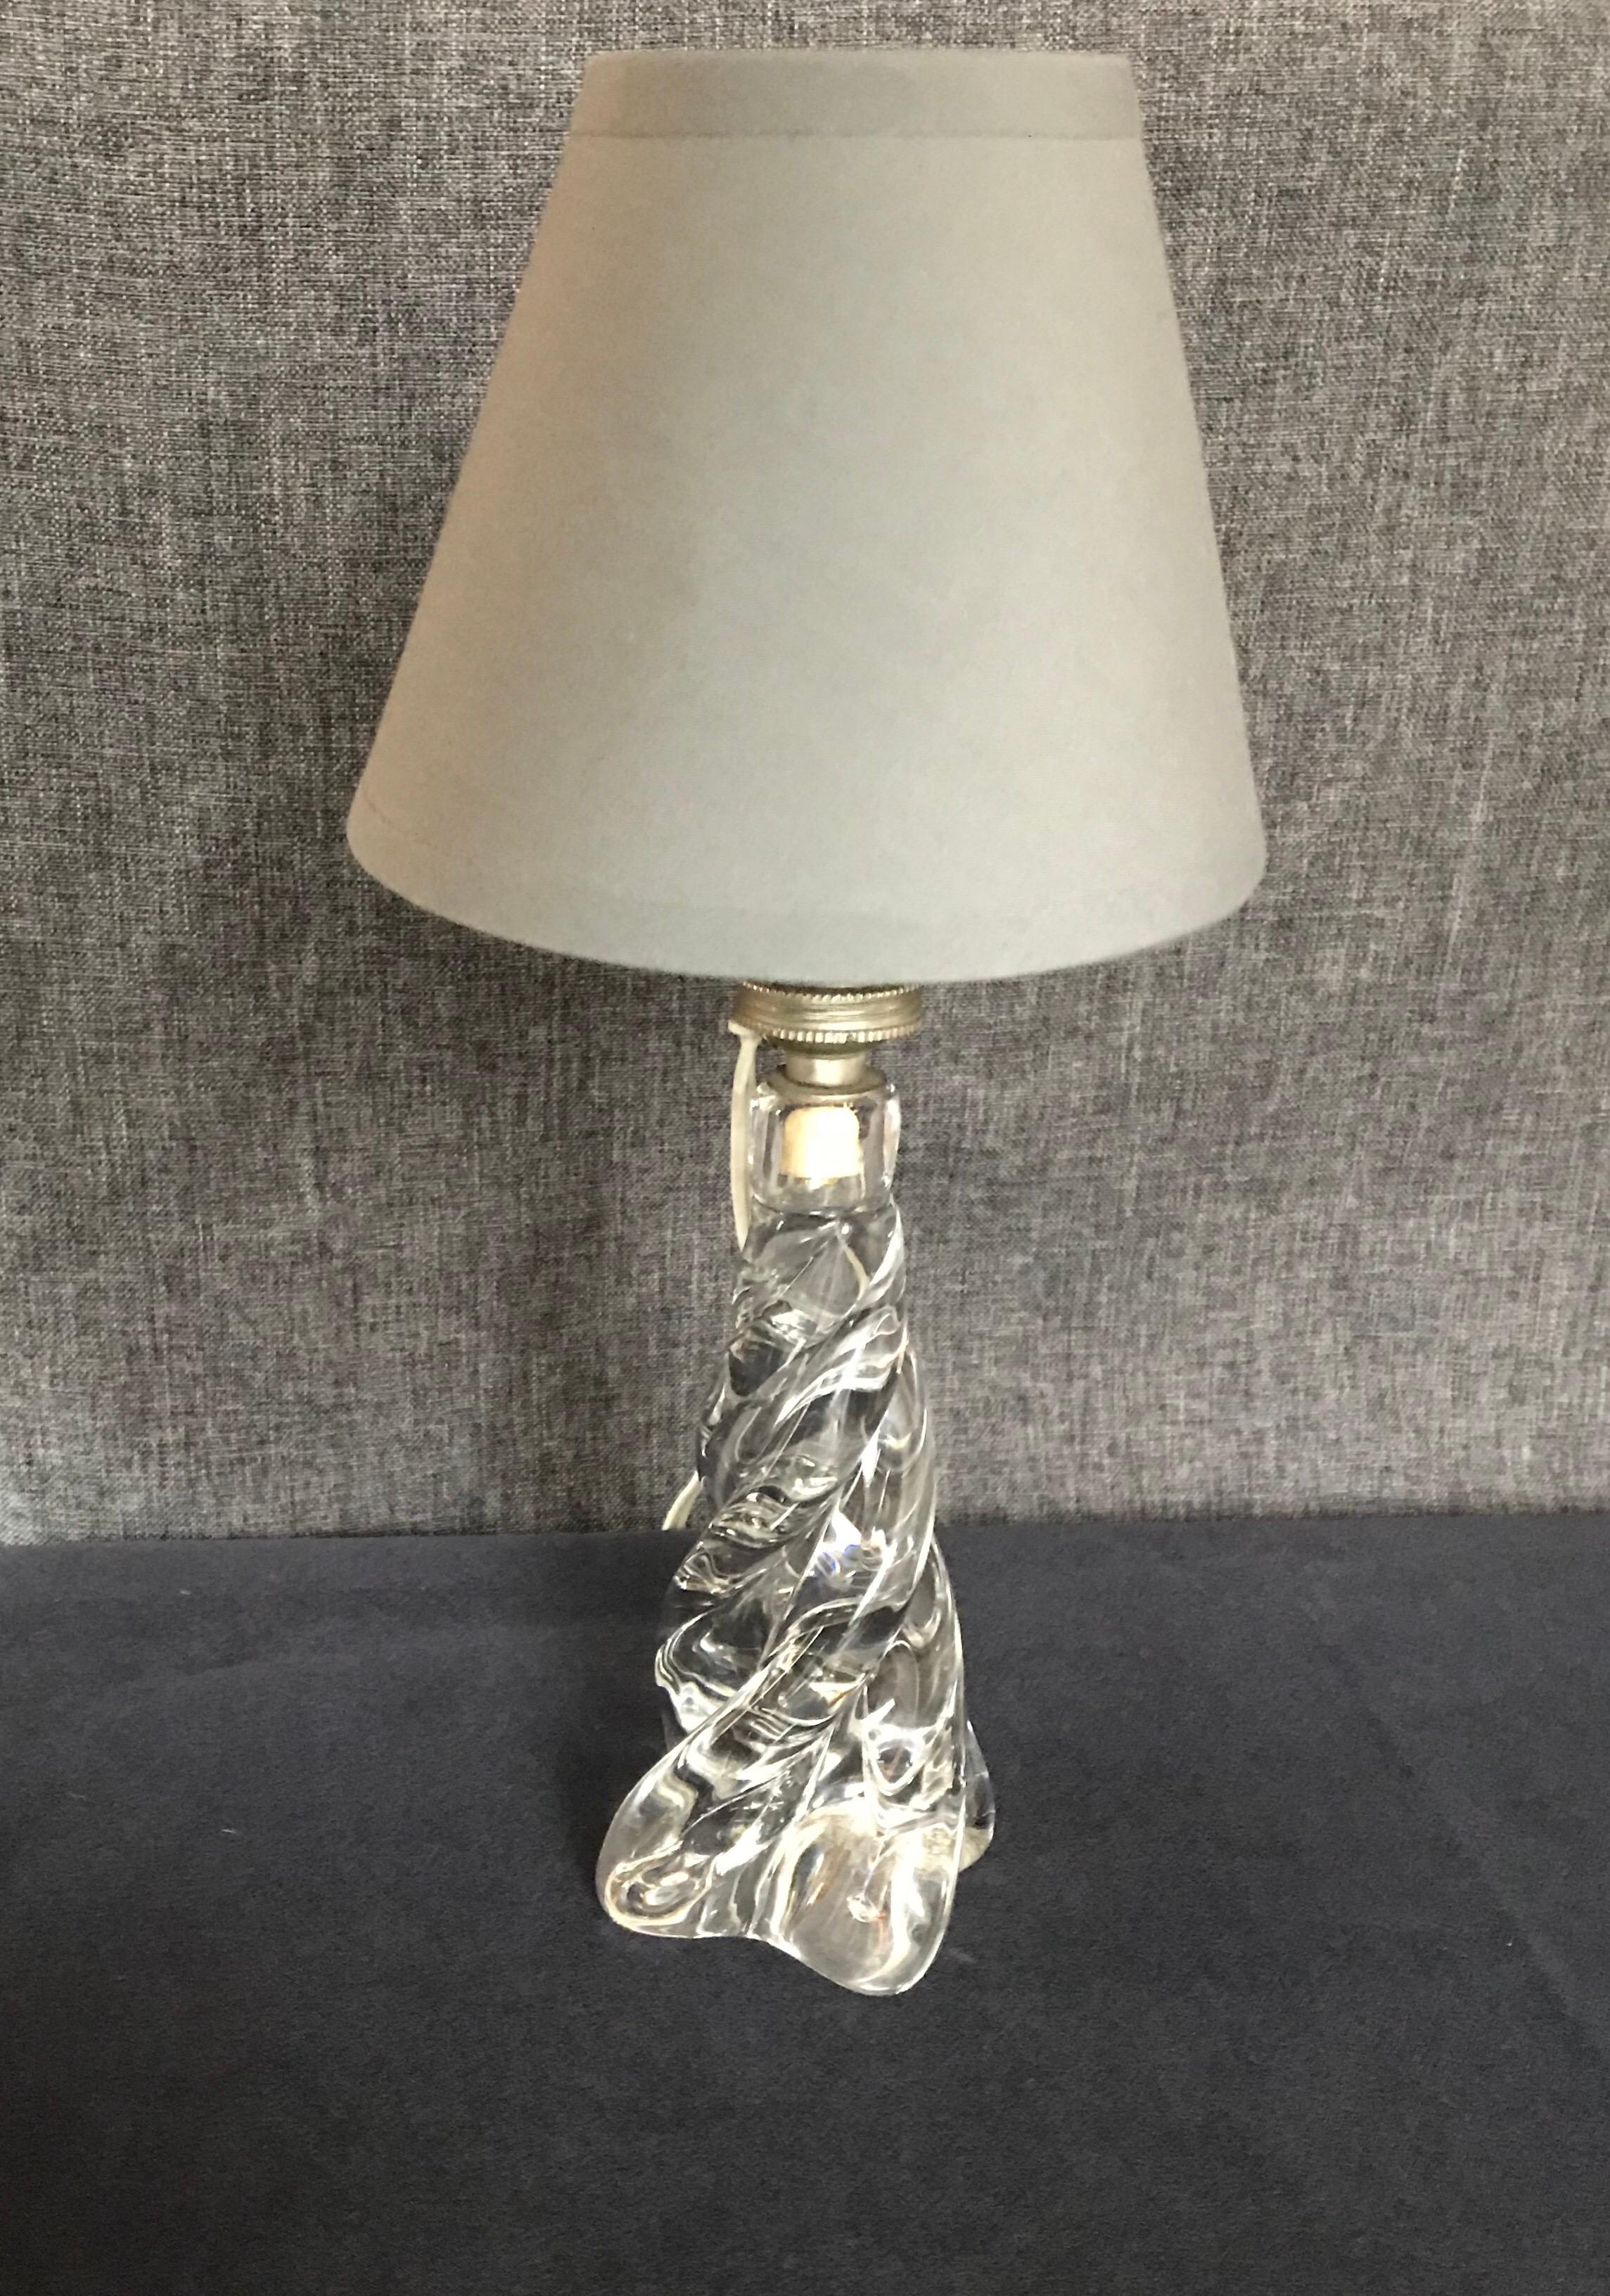 Beautiful crystal table lamp with its gray cotton lampshade.
Measures: D 14 x H 30.5 cm
Without the lampshade D 8 x H 20 cm
Lampshade D 14 x H 10.5 cm.
 